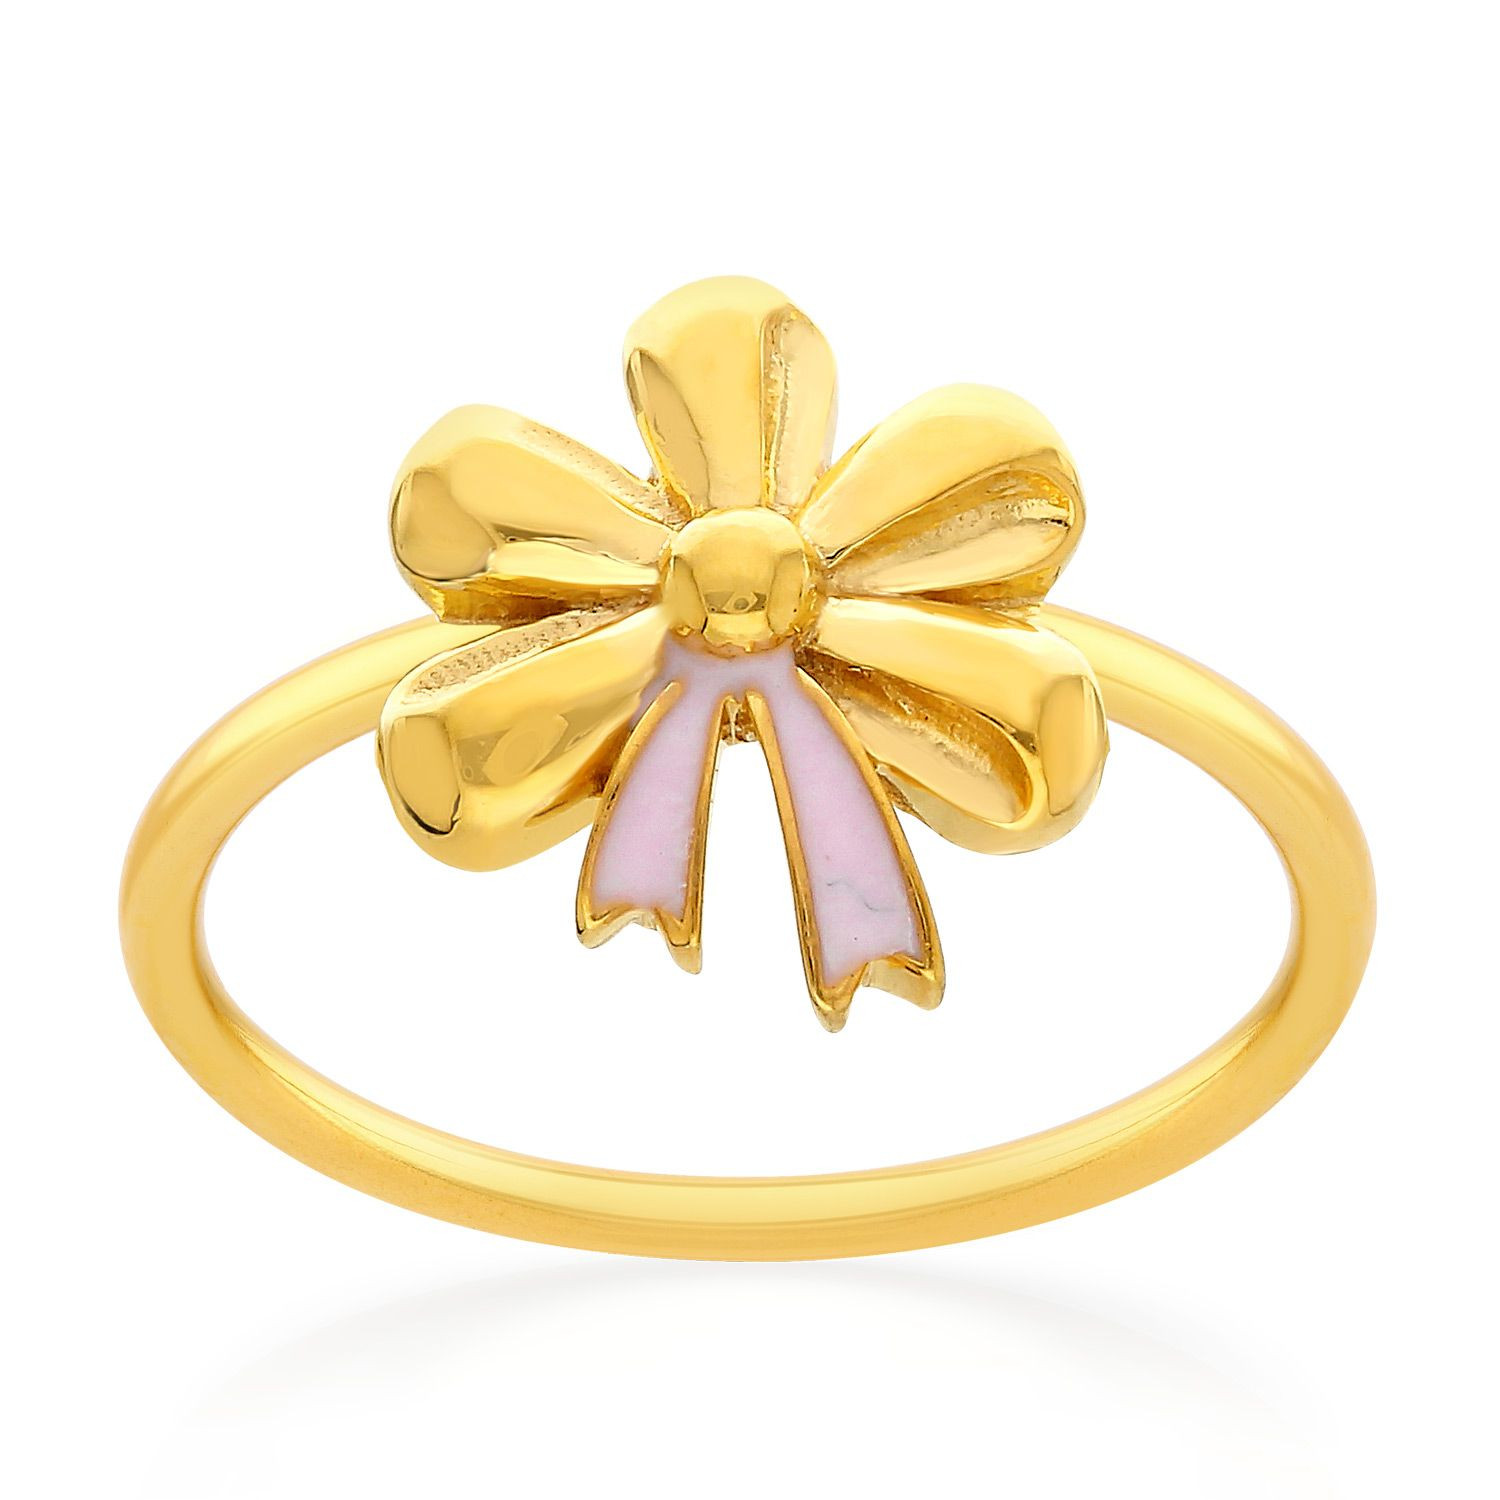 Floral Edge Cocktail Ring | Radiant Bay